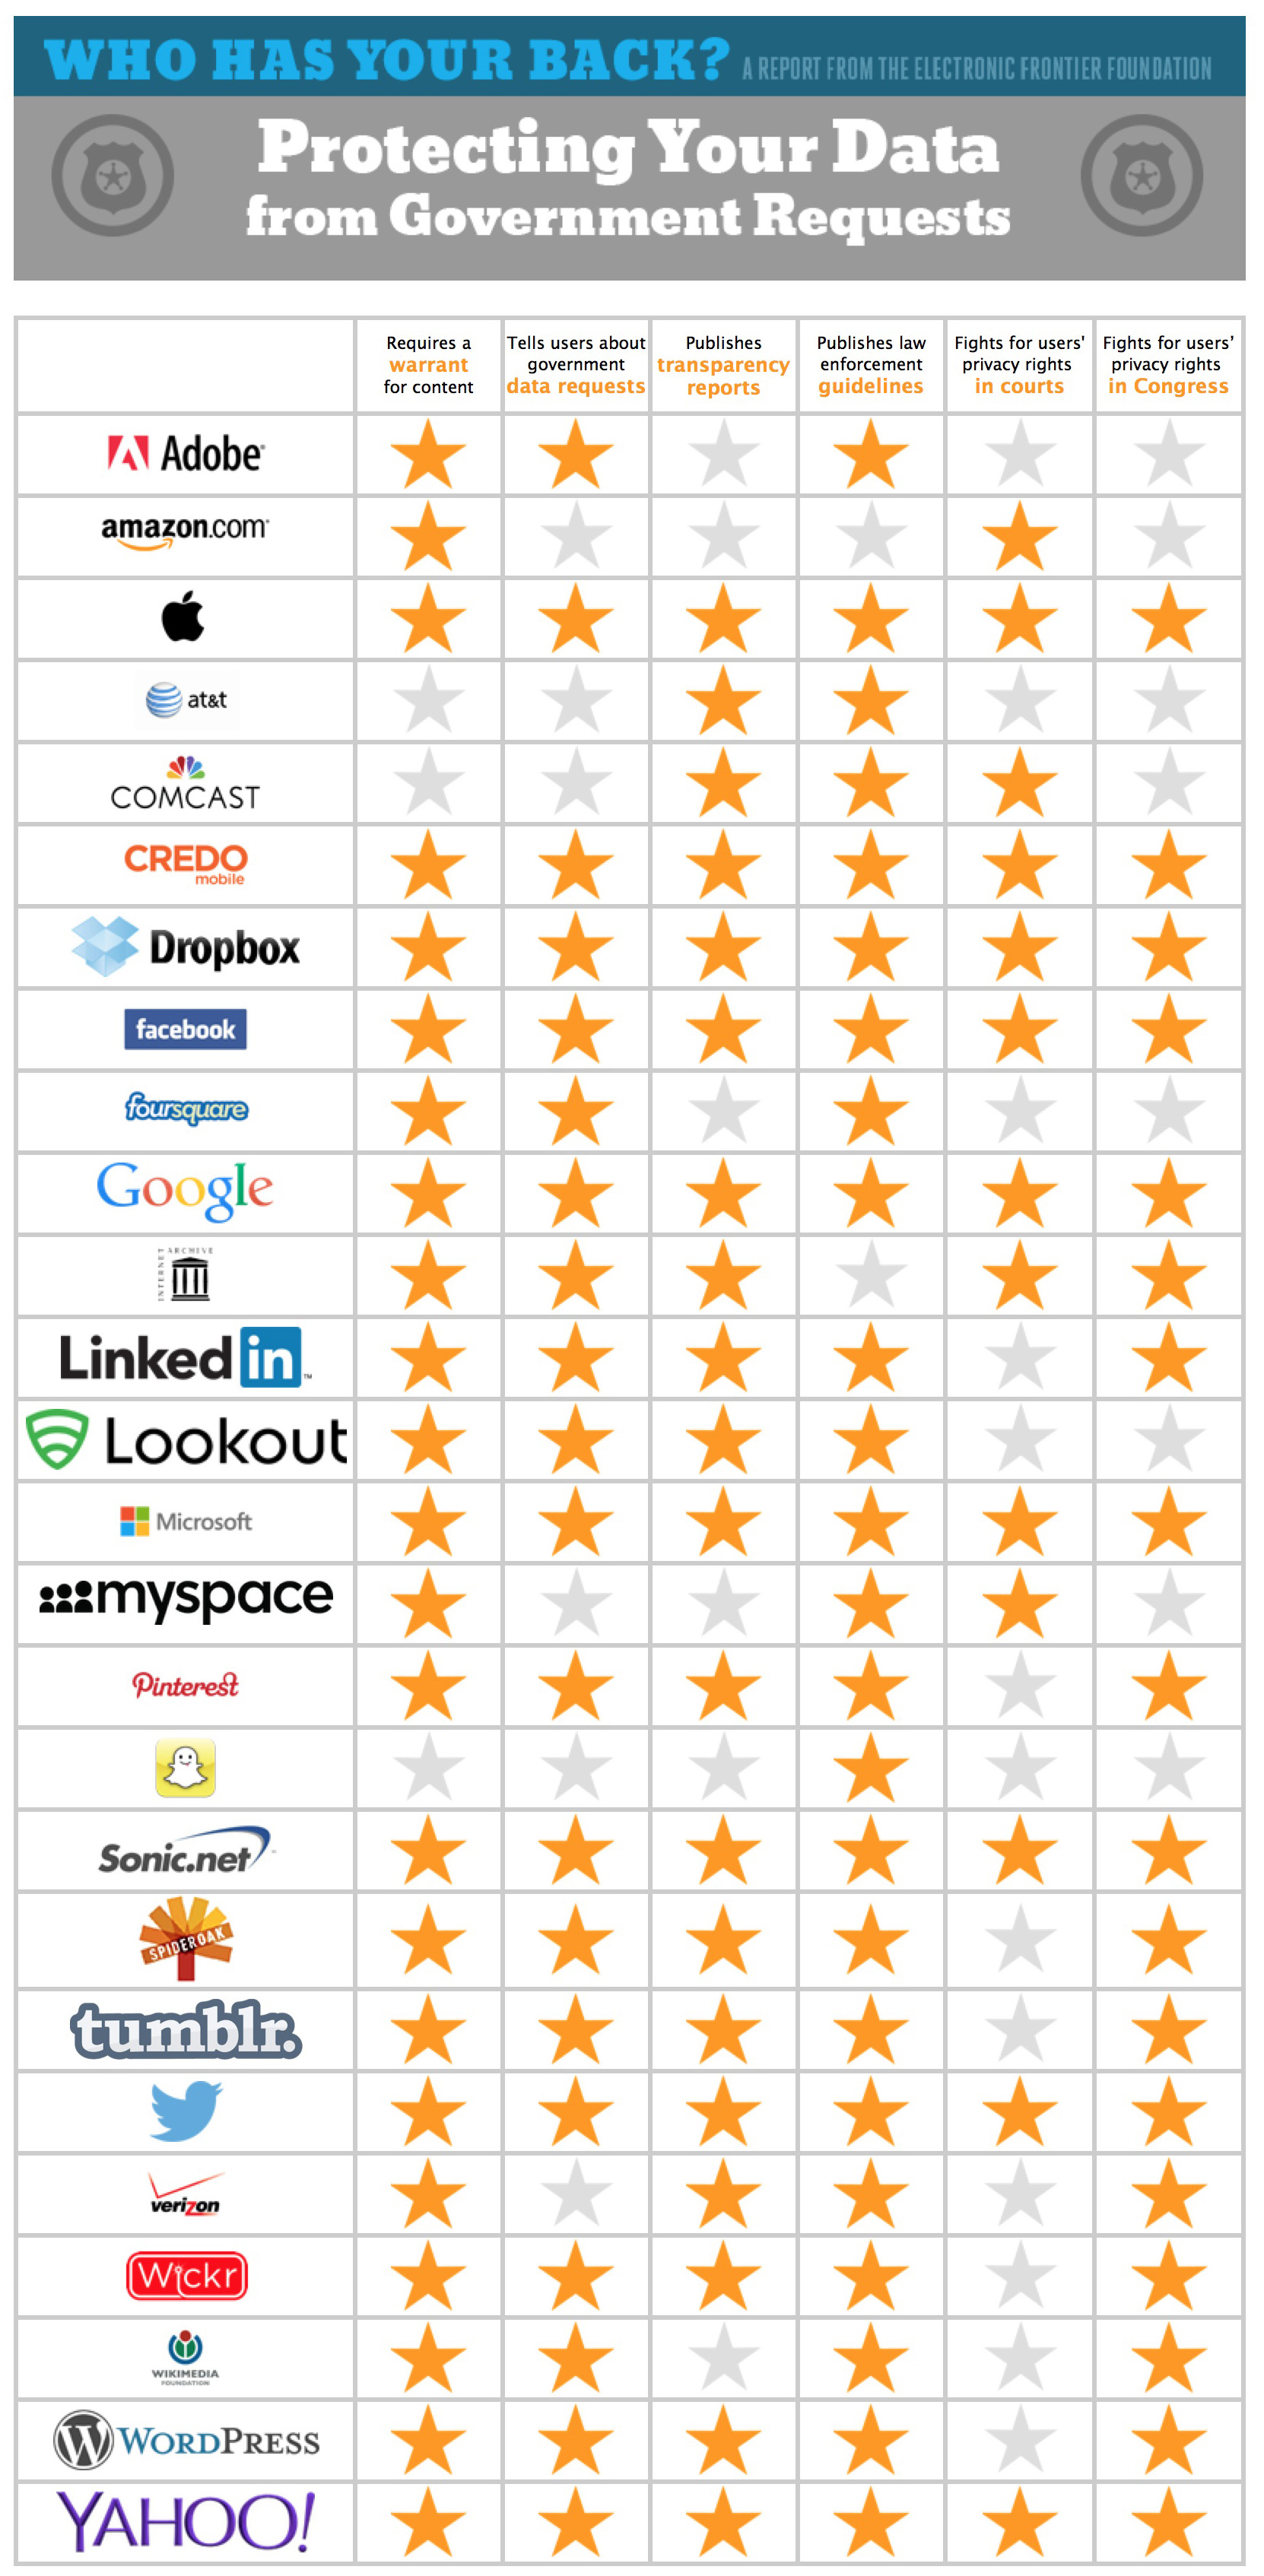 EFF Awards Apple 6 Gold Stars for Protecting Your Data From Government Requests [Chart]